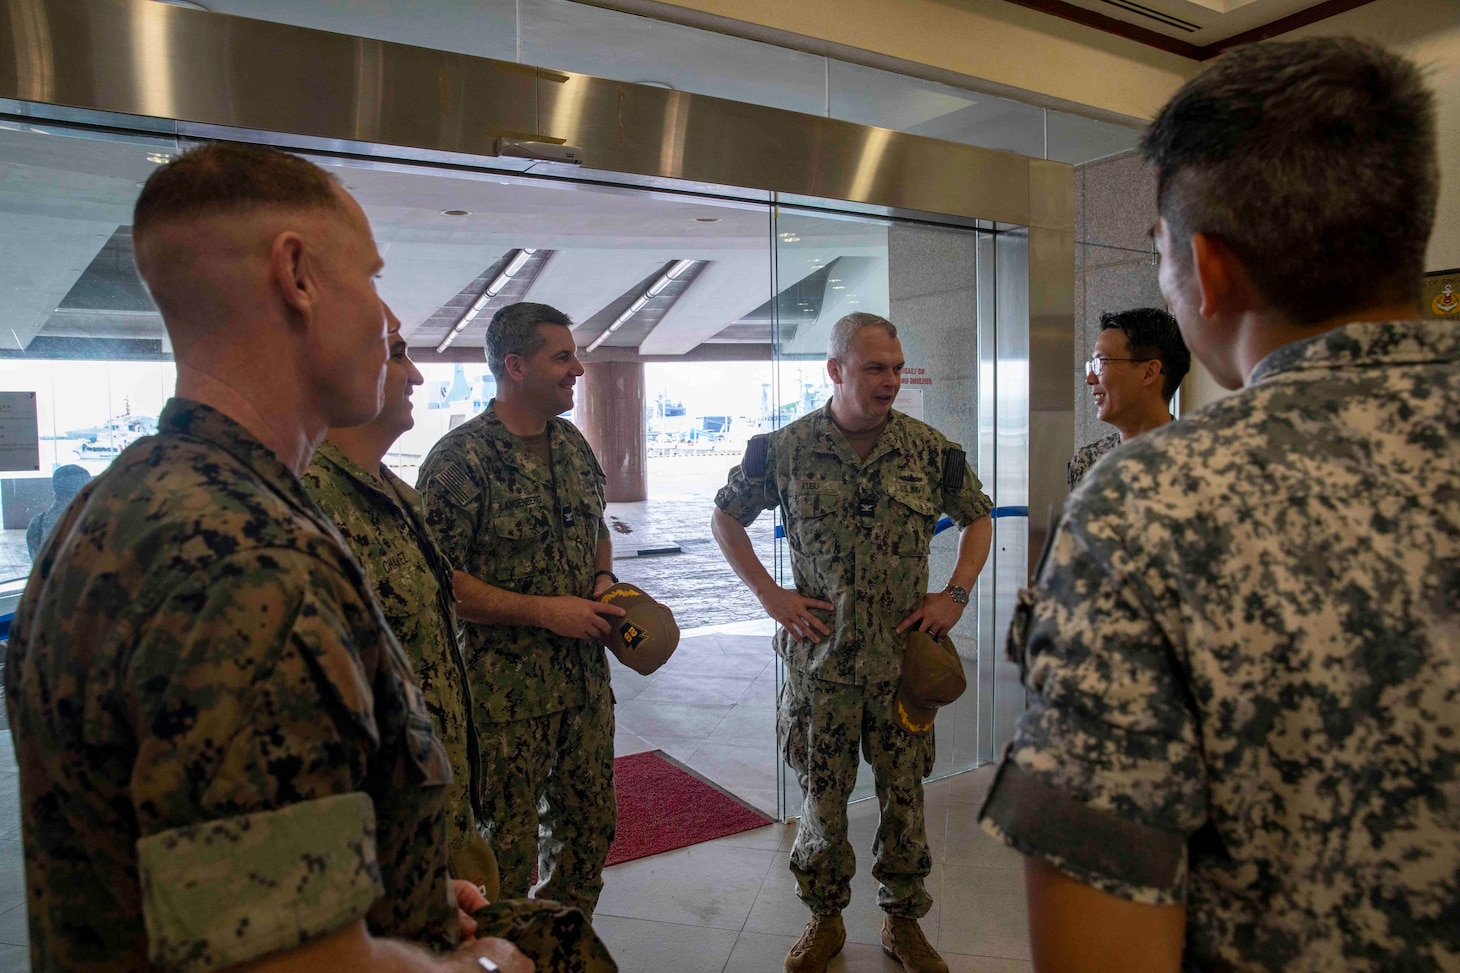 SINGAPORE (Jan. 9, 2023) Capt. Justin Kubu, commodore of Amphibious Squadron SEVEN, center right, and Capt. Doug Langenberg, commanding officer of USS John P. Murtha (LPD 26), speak to commanders of the Republic of Singapore Navy prior to the opening ceremony of Cooperation Afloat Readiness and Training (CARAT)/Marine Exercise (MAREX) Singapore 2022, Jan. 9, 2023. CARAT Singapore is a bilateral exercise between Singapore and the United States designed to promote regional security cooperation, maintain and strengthen maritime partnerships, and enhance maritime cooperation. In its 28th, the CARAT series is comprised of multinational exercises, designed to enhance U.S. and partner forces’ abilities to operate together in response to traditional and non-traditional maritime security challenges in the Indo-Pacific region. The Makin Island Amphibious Ready Group, comprised of amphibious assault ship USS Makin Island (LHD 8) and amphibious transport dock USS Anchorage (LPD 23) and USS John P. Murtha (LPD 26), is operating in the U.S. 7th Fleet area of operations with the embarked 13th Marine Expeditionary Unit to enhance interoperability with Allies and partners and serve as a ready-response force to defend peace and maintain stability in the Indo-Pacific region. (U.S. Navy photo by Mass Communication Specialist 3rd Class Kendra Helmbrecht)